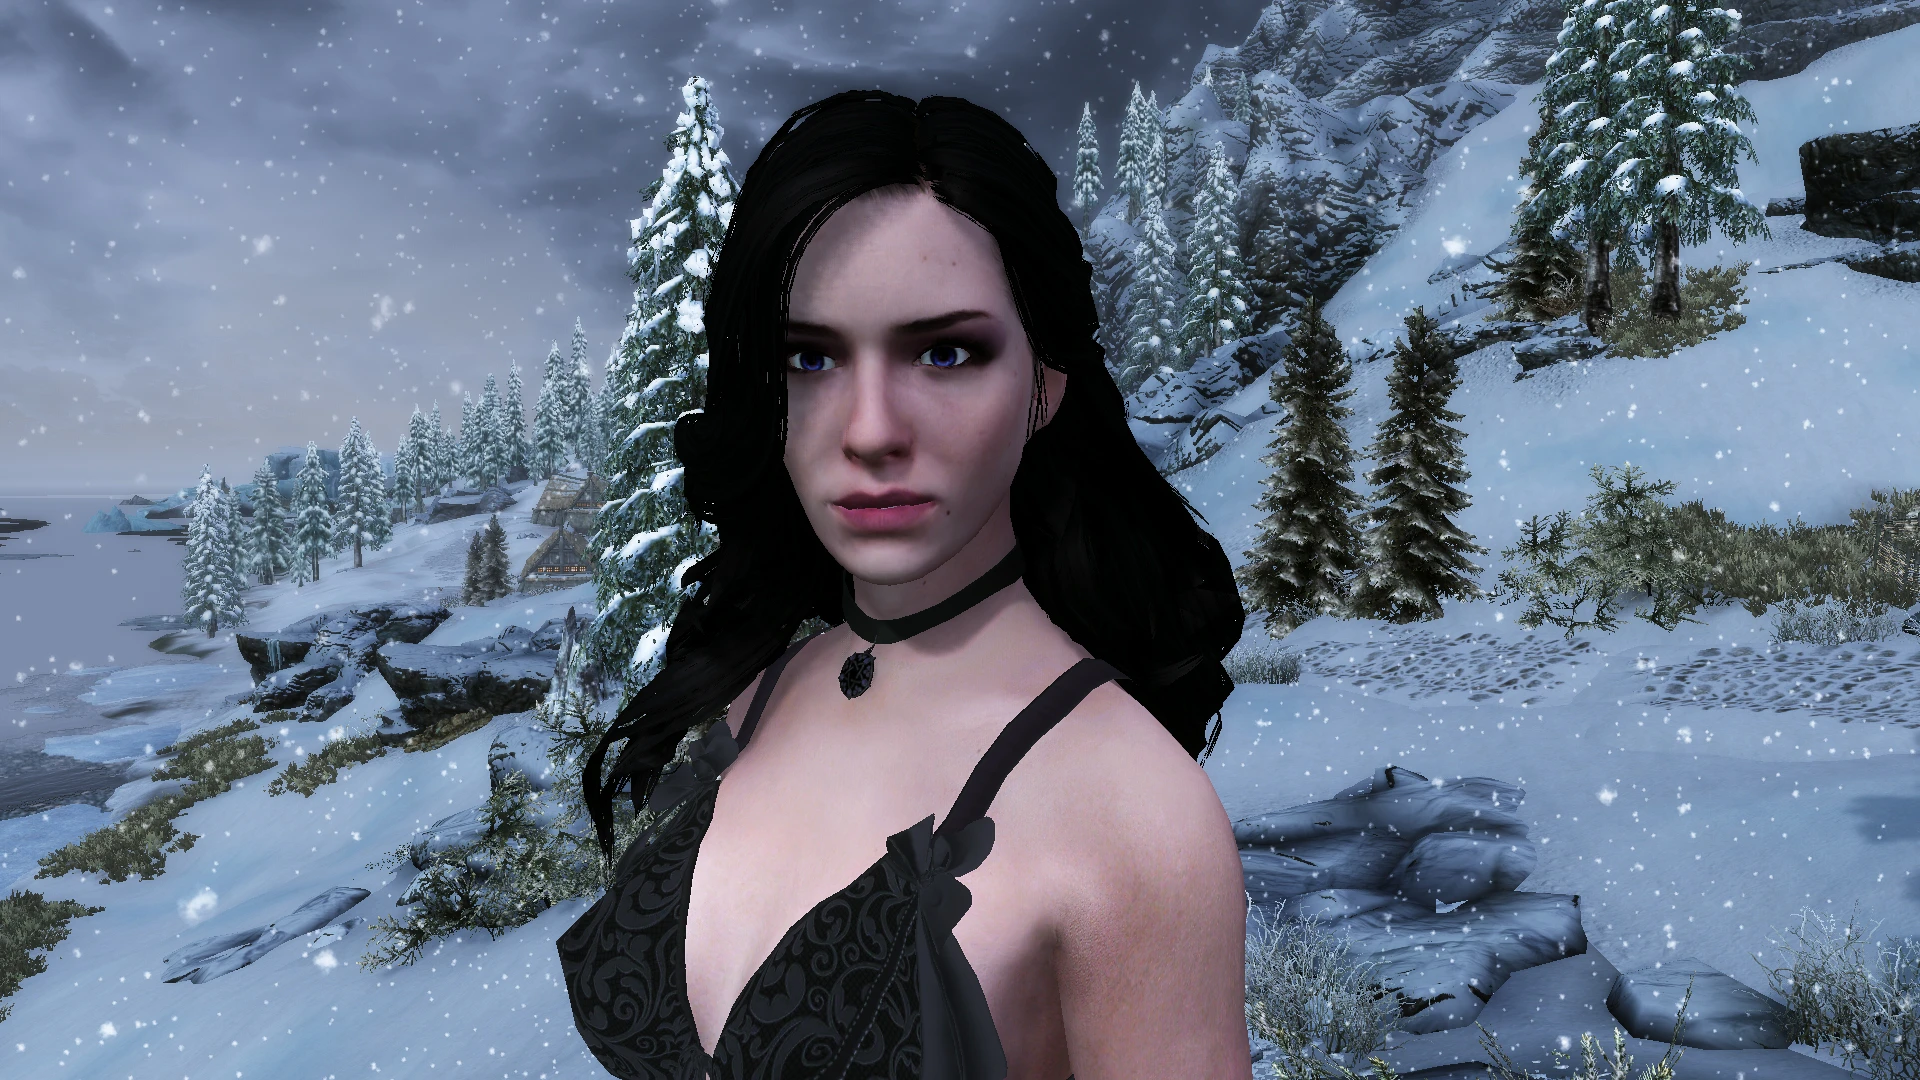 Yennefer of vengerberg the witcher 3 voiced standalone follower фото 2